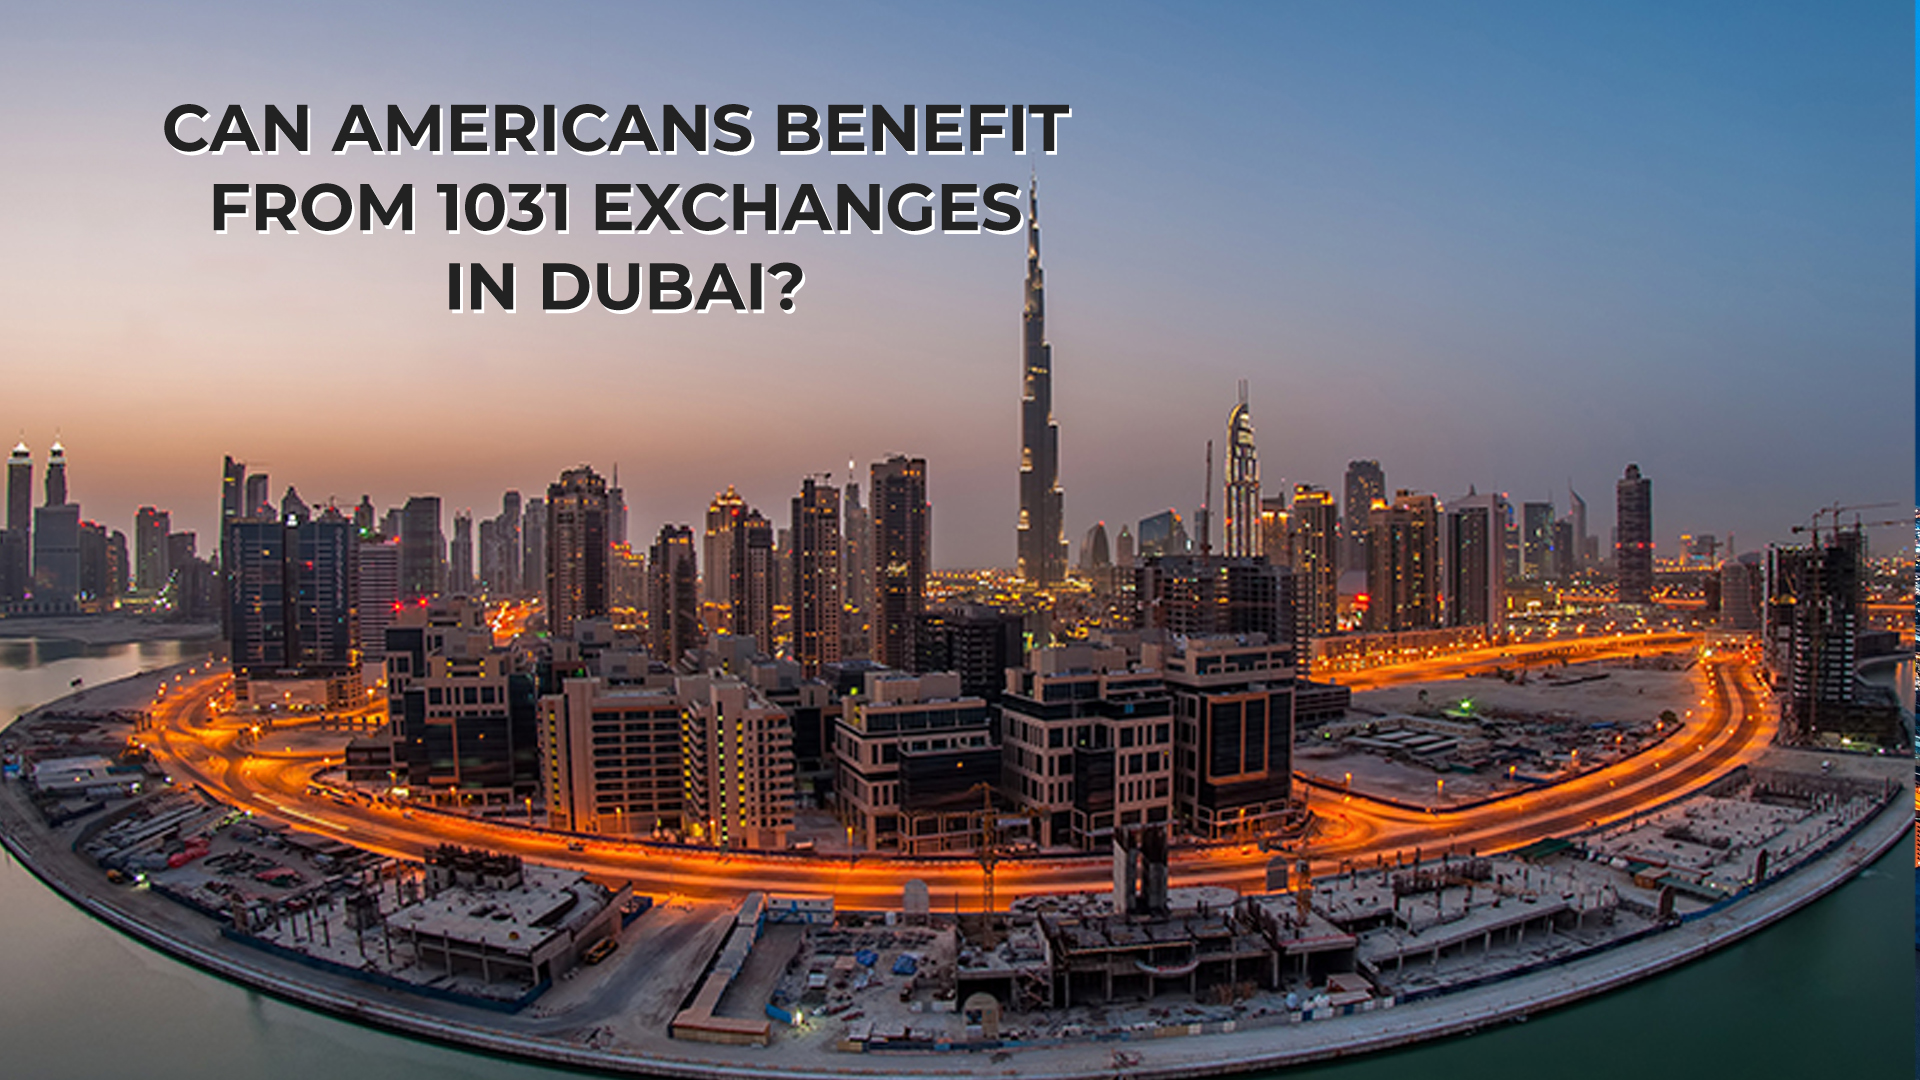 Can Americans Benefit From 1031 Exchanges in Dubai